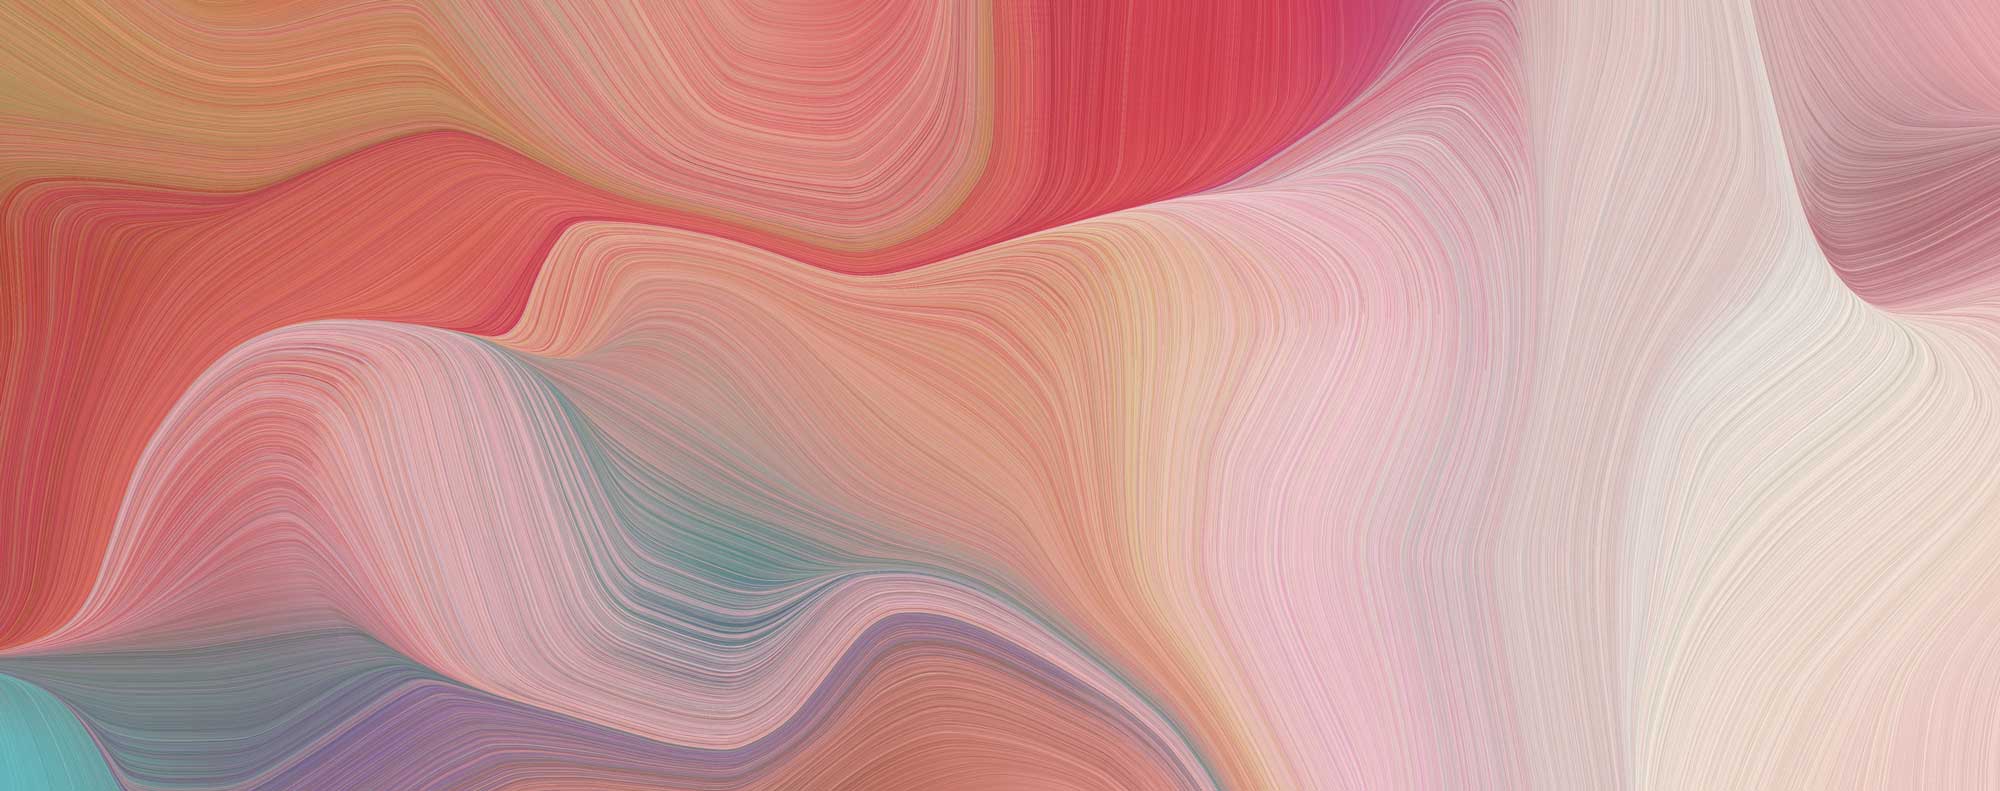 warm colorful abstract lines